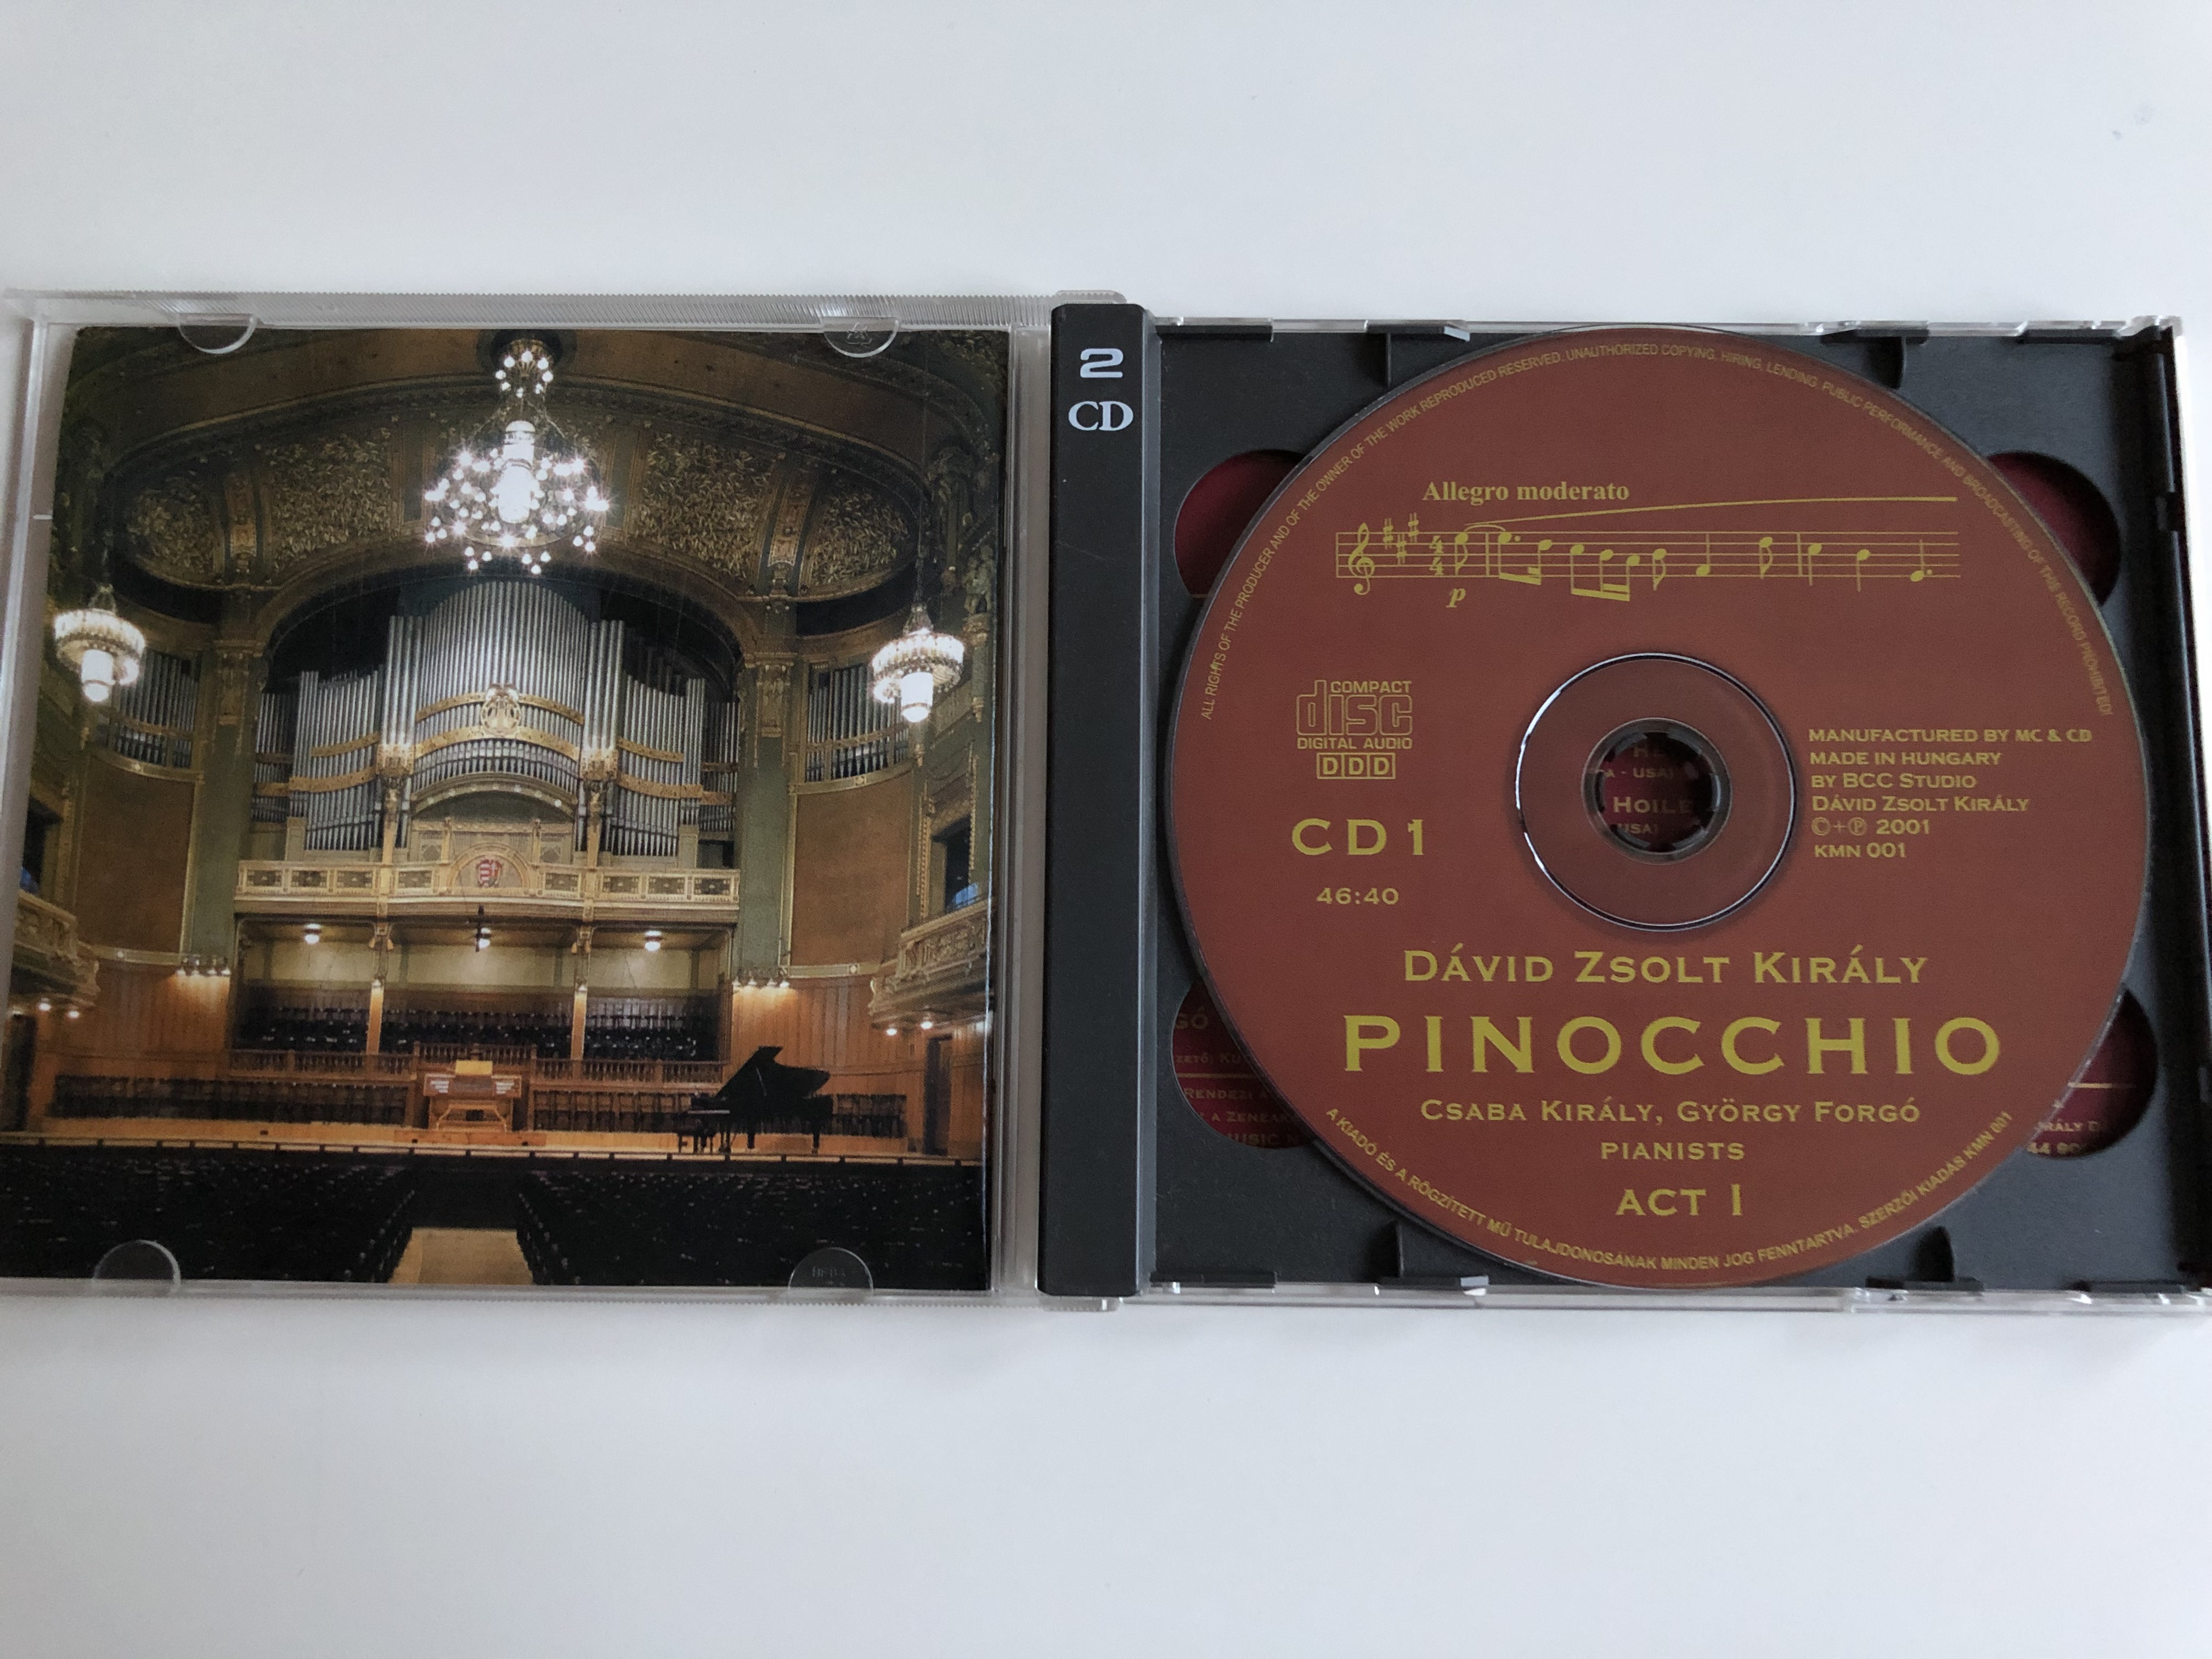 david-zsolt-kiraly-pinocchio-ballet-symphony-in-3-acts-csaba-kiraly-gyorgy-forgo-pianists-live-recording-of-the-world-premiere-kiraly-music-network-2x-audio-cd-2001-kmn-001-002-14-.jpg